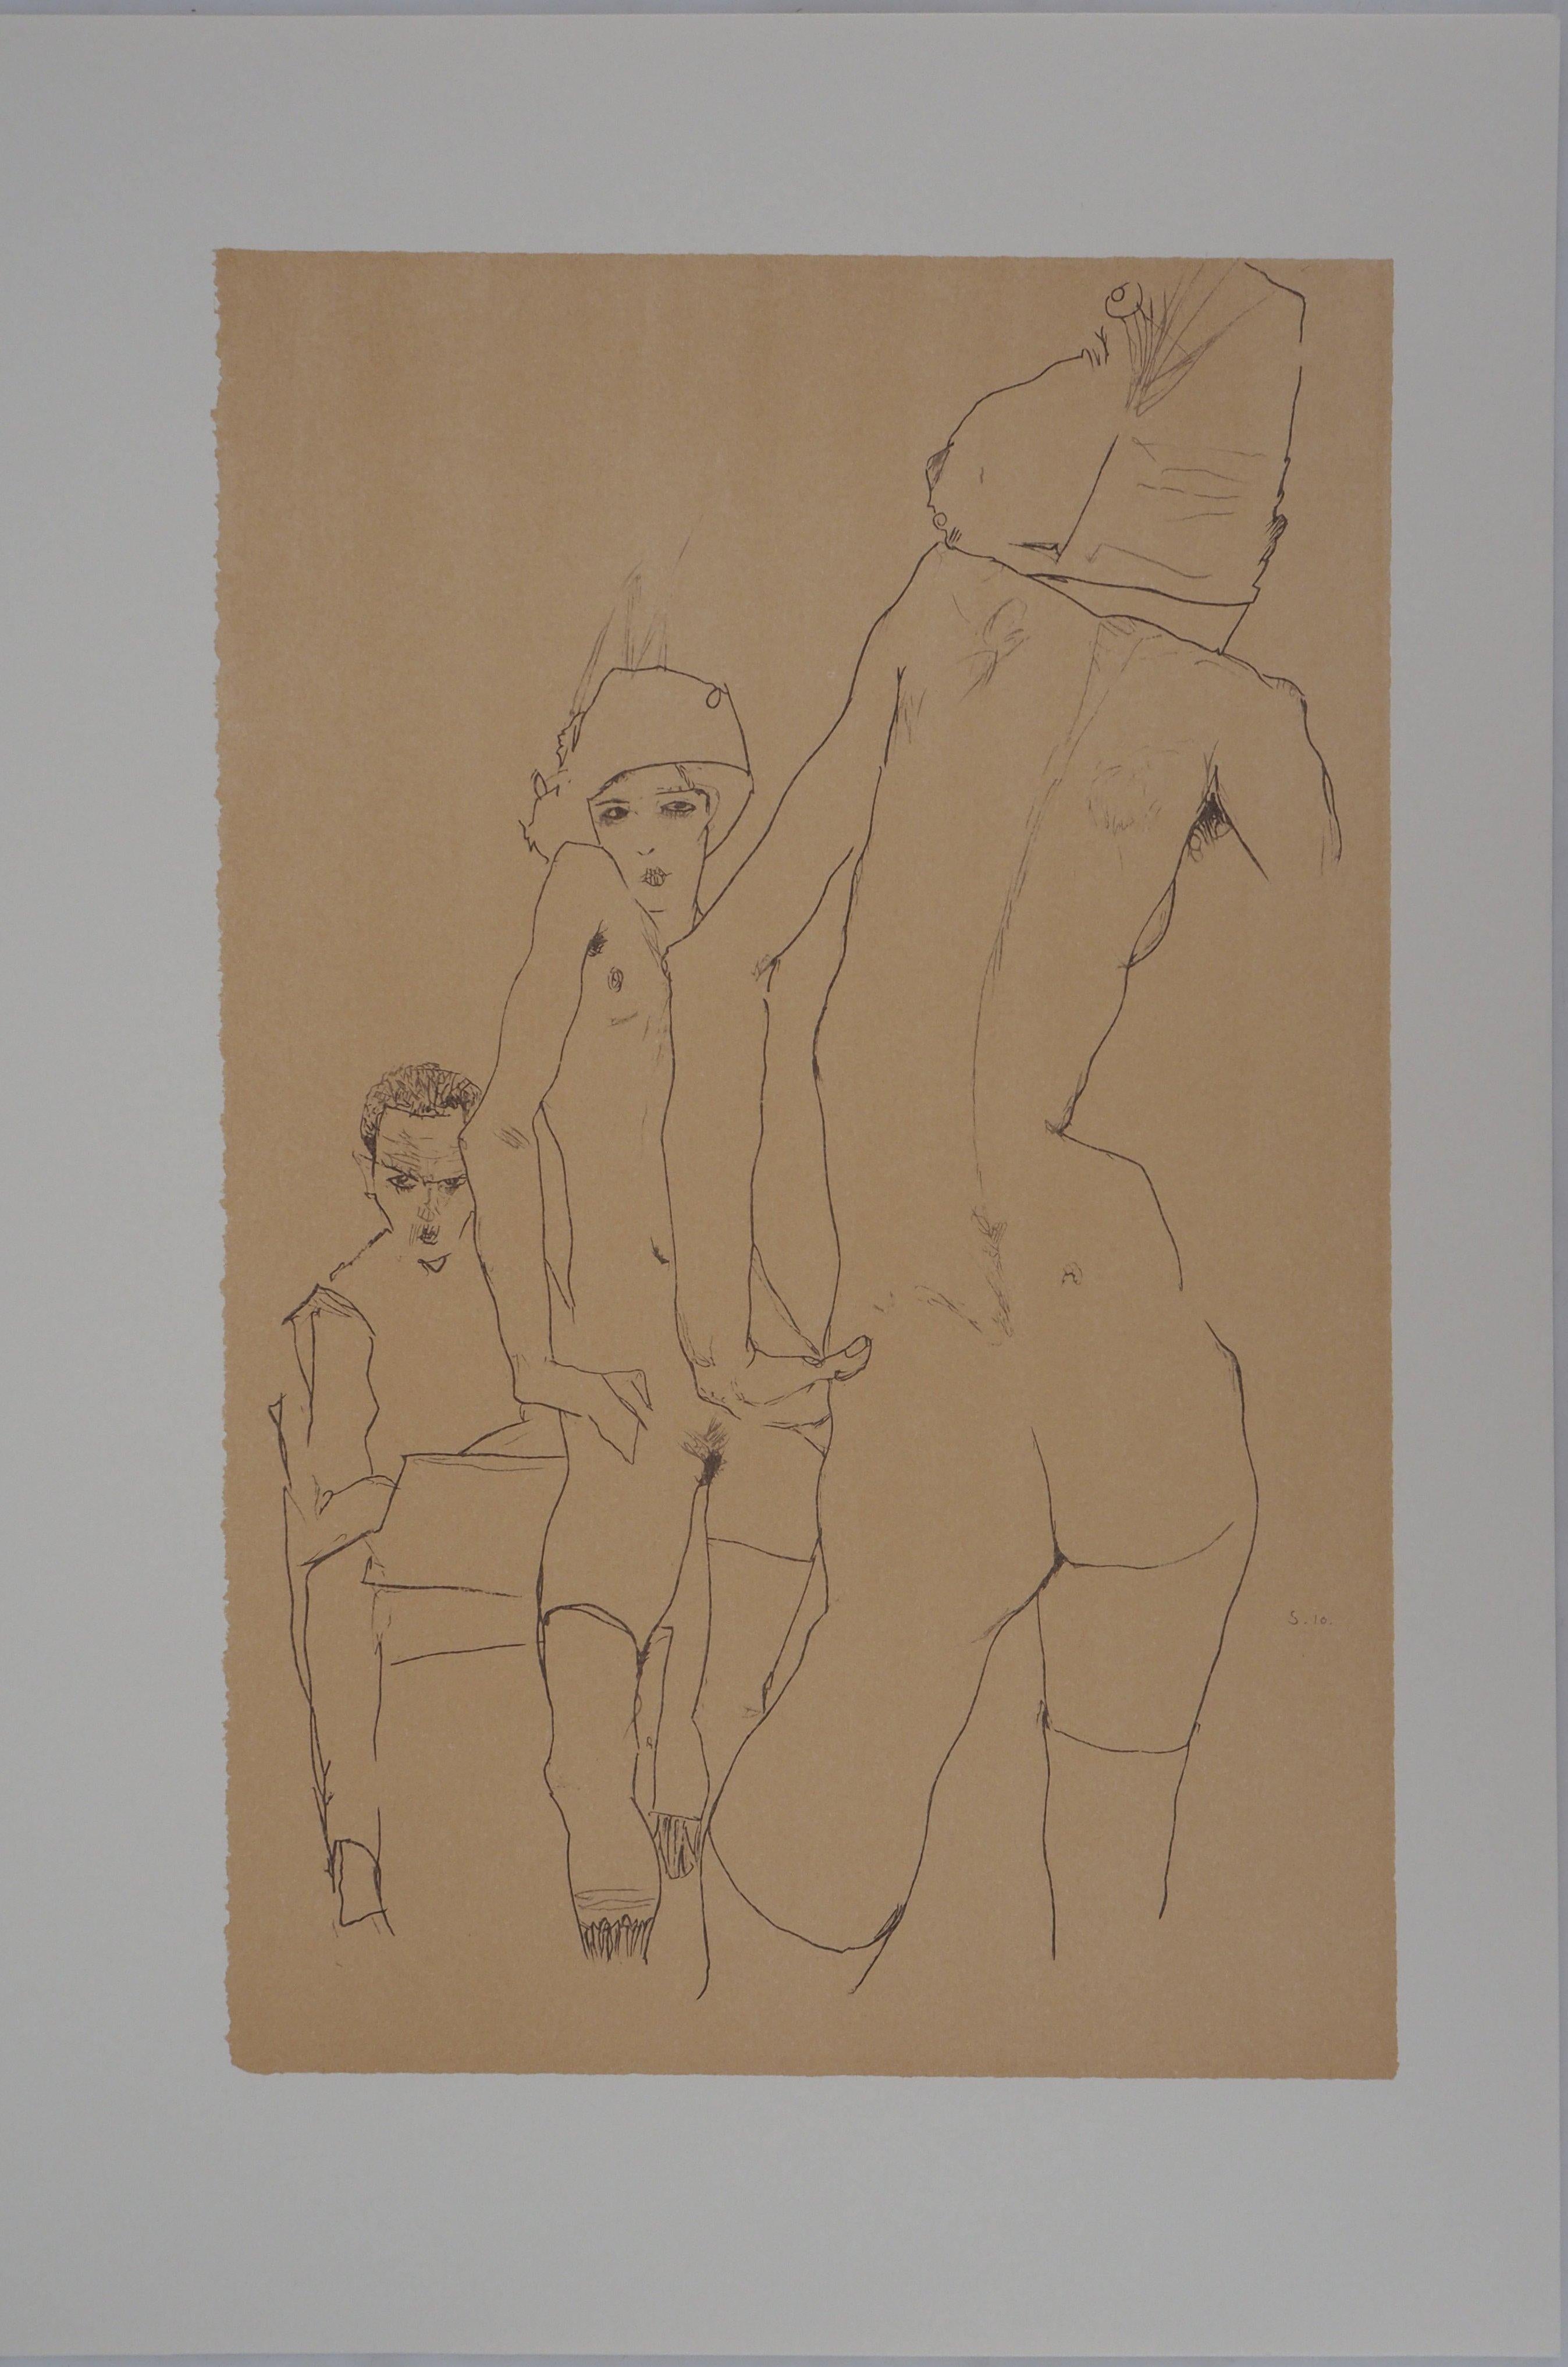 In the Miror - Lithograph (Kallir #D737) - Print by (after) Egon Schiele